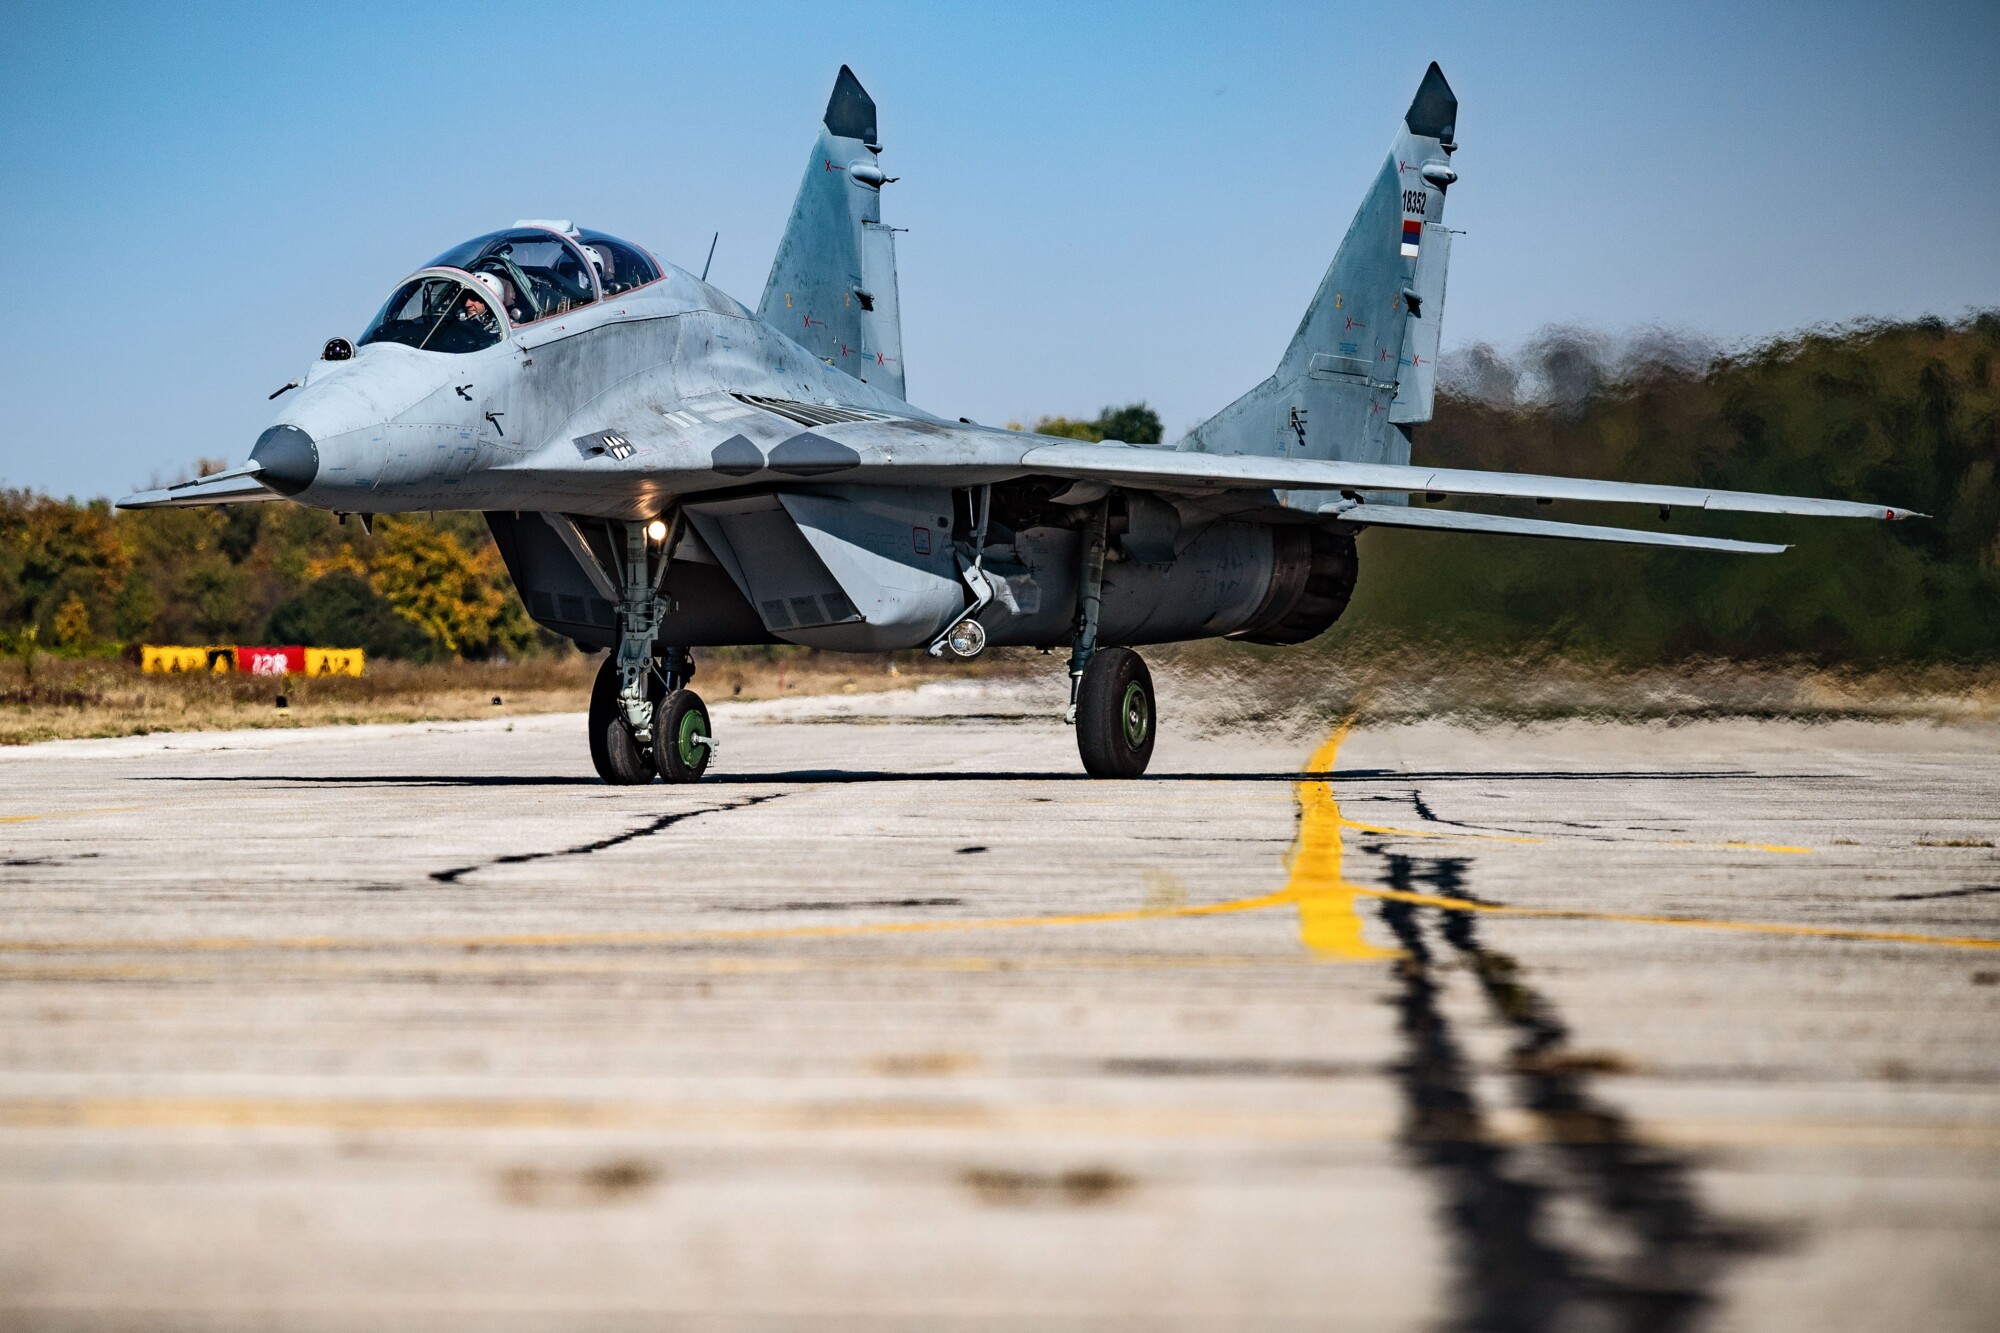 Poland to Send All MiG-29 Fighter Jets to US Base Amid Ukraine Conflict